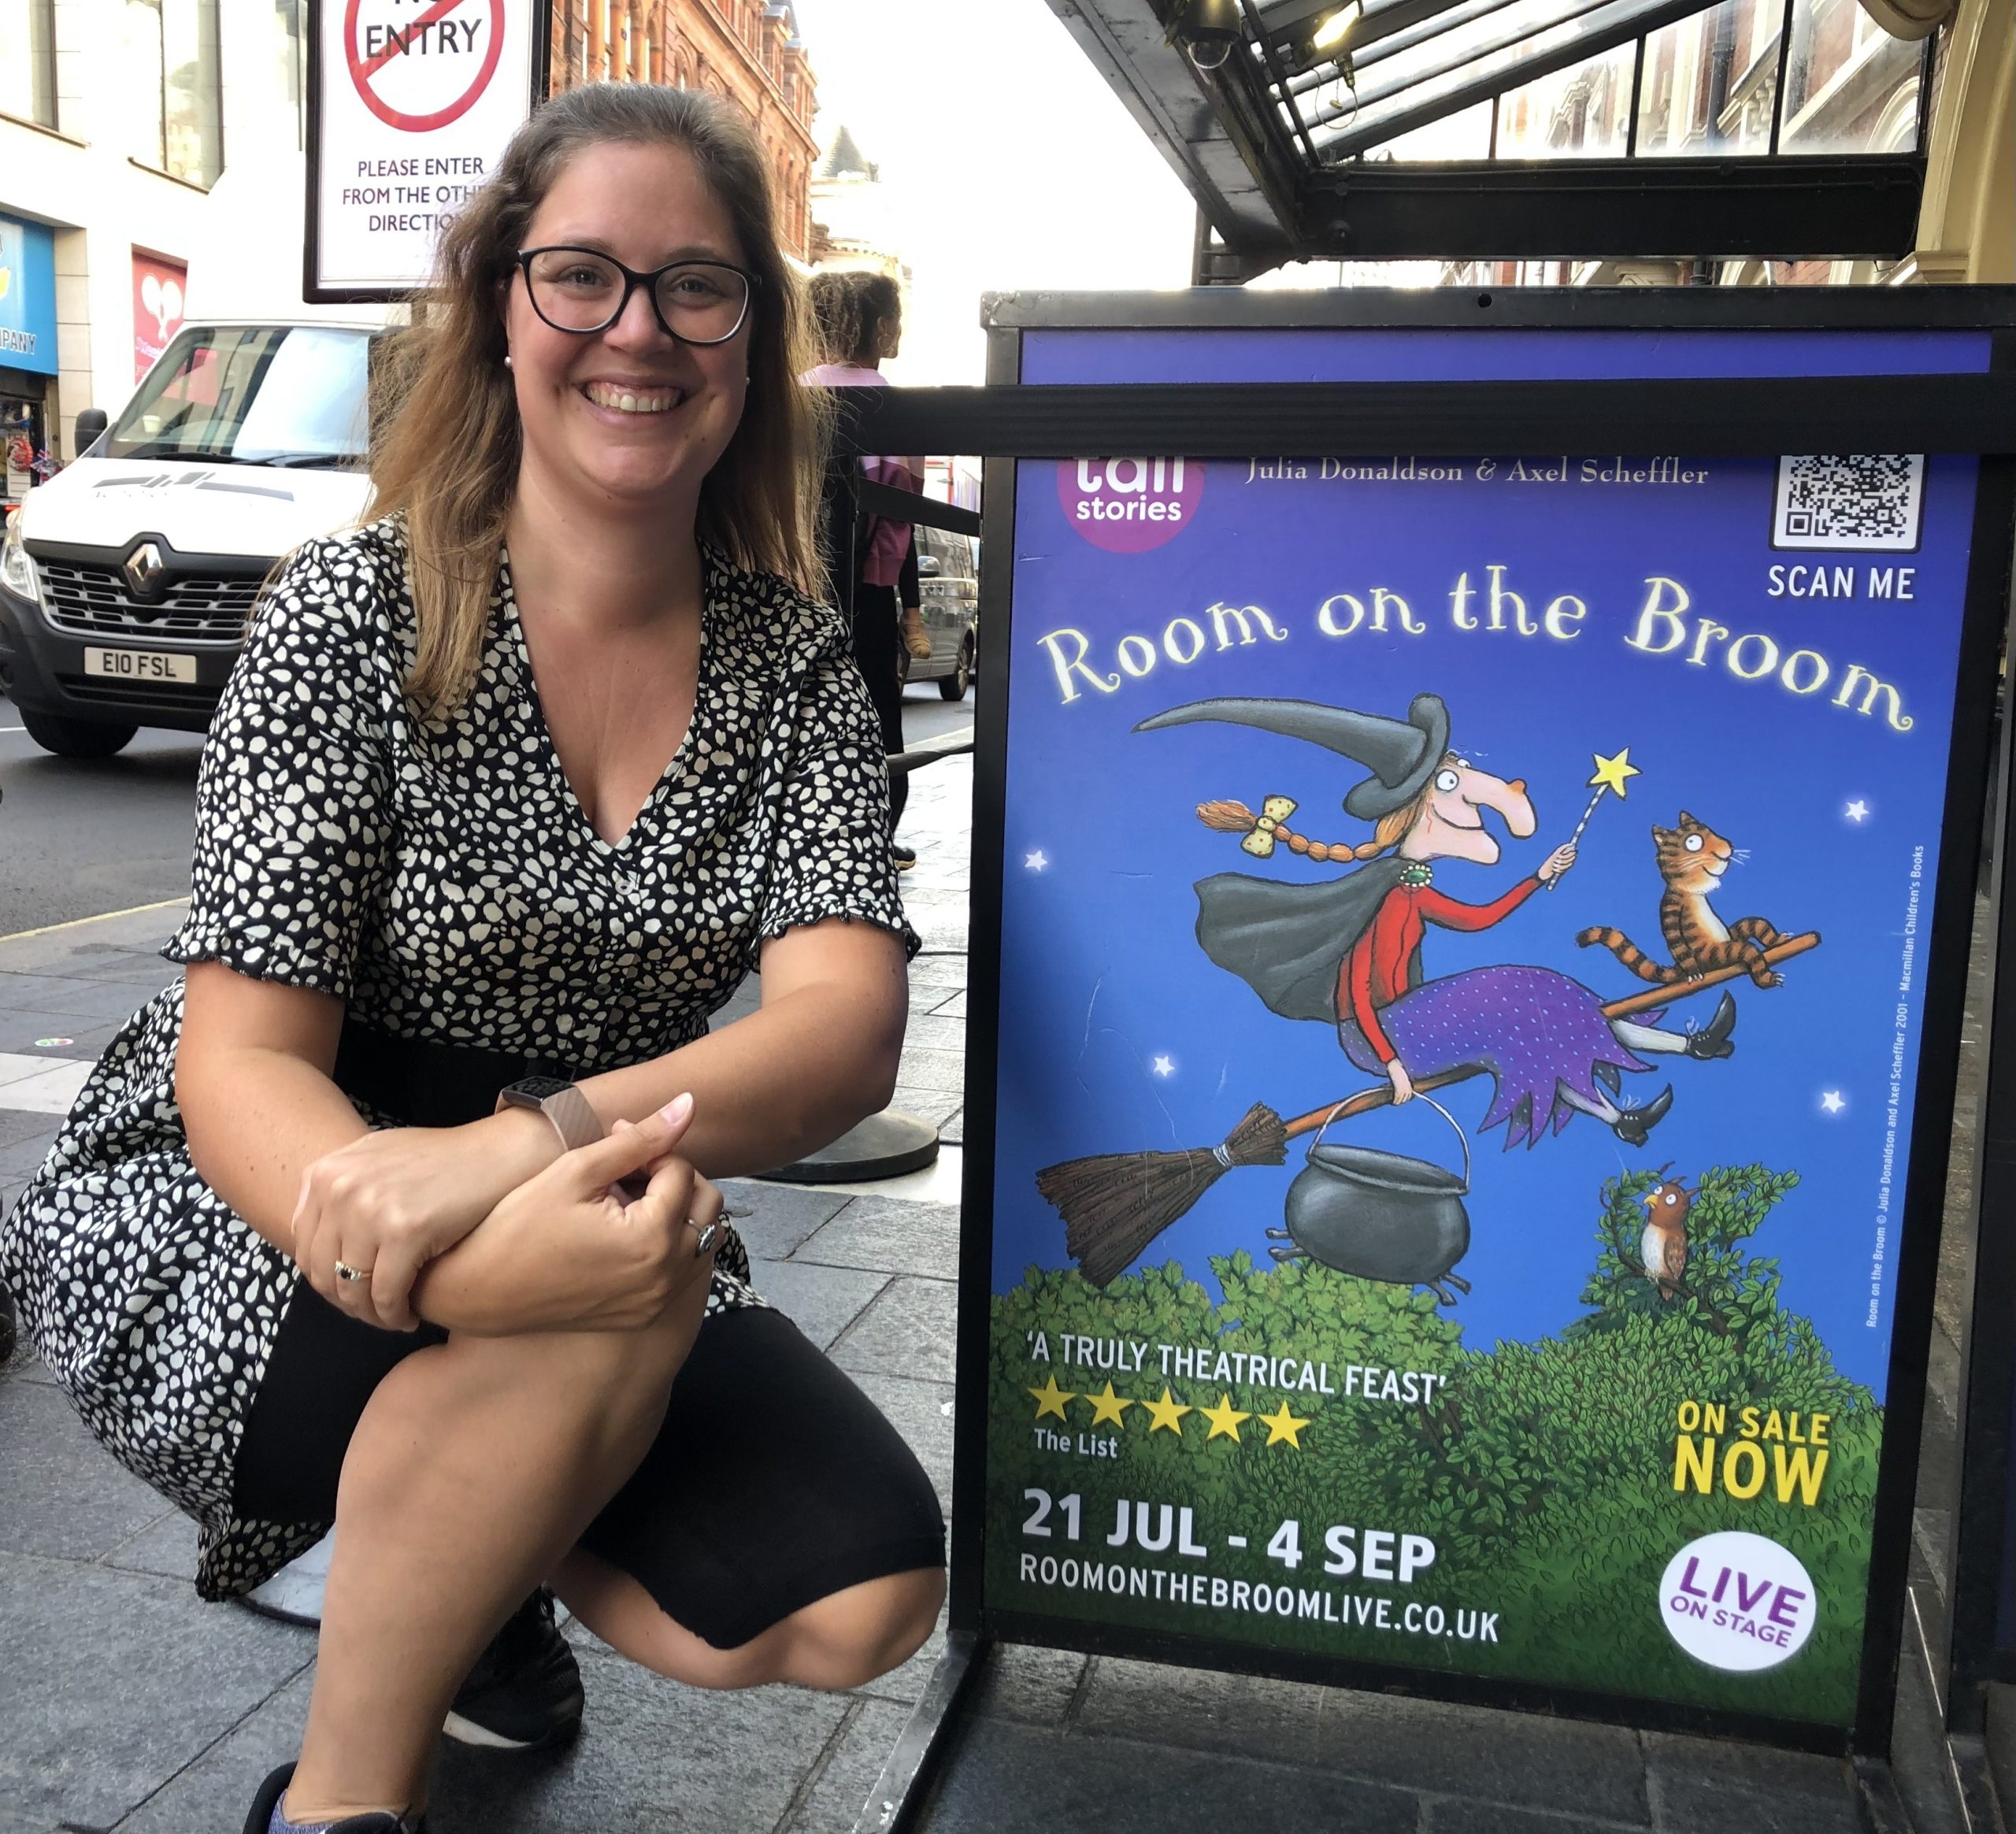 franchisee-alex-jigsaw-bexleyheath-room-on-the-broom-theatre-review-image